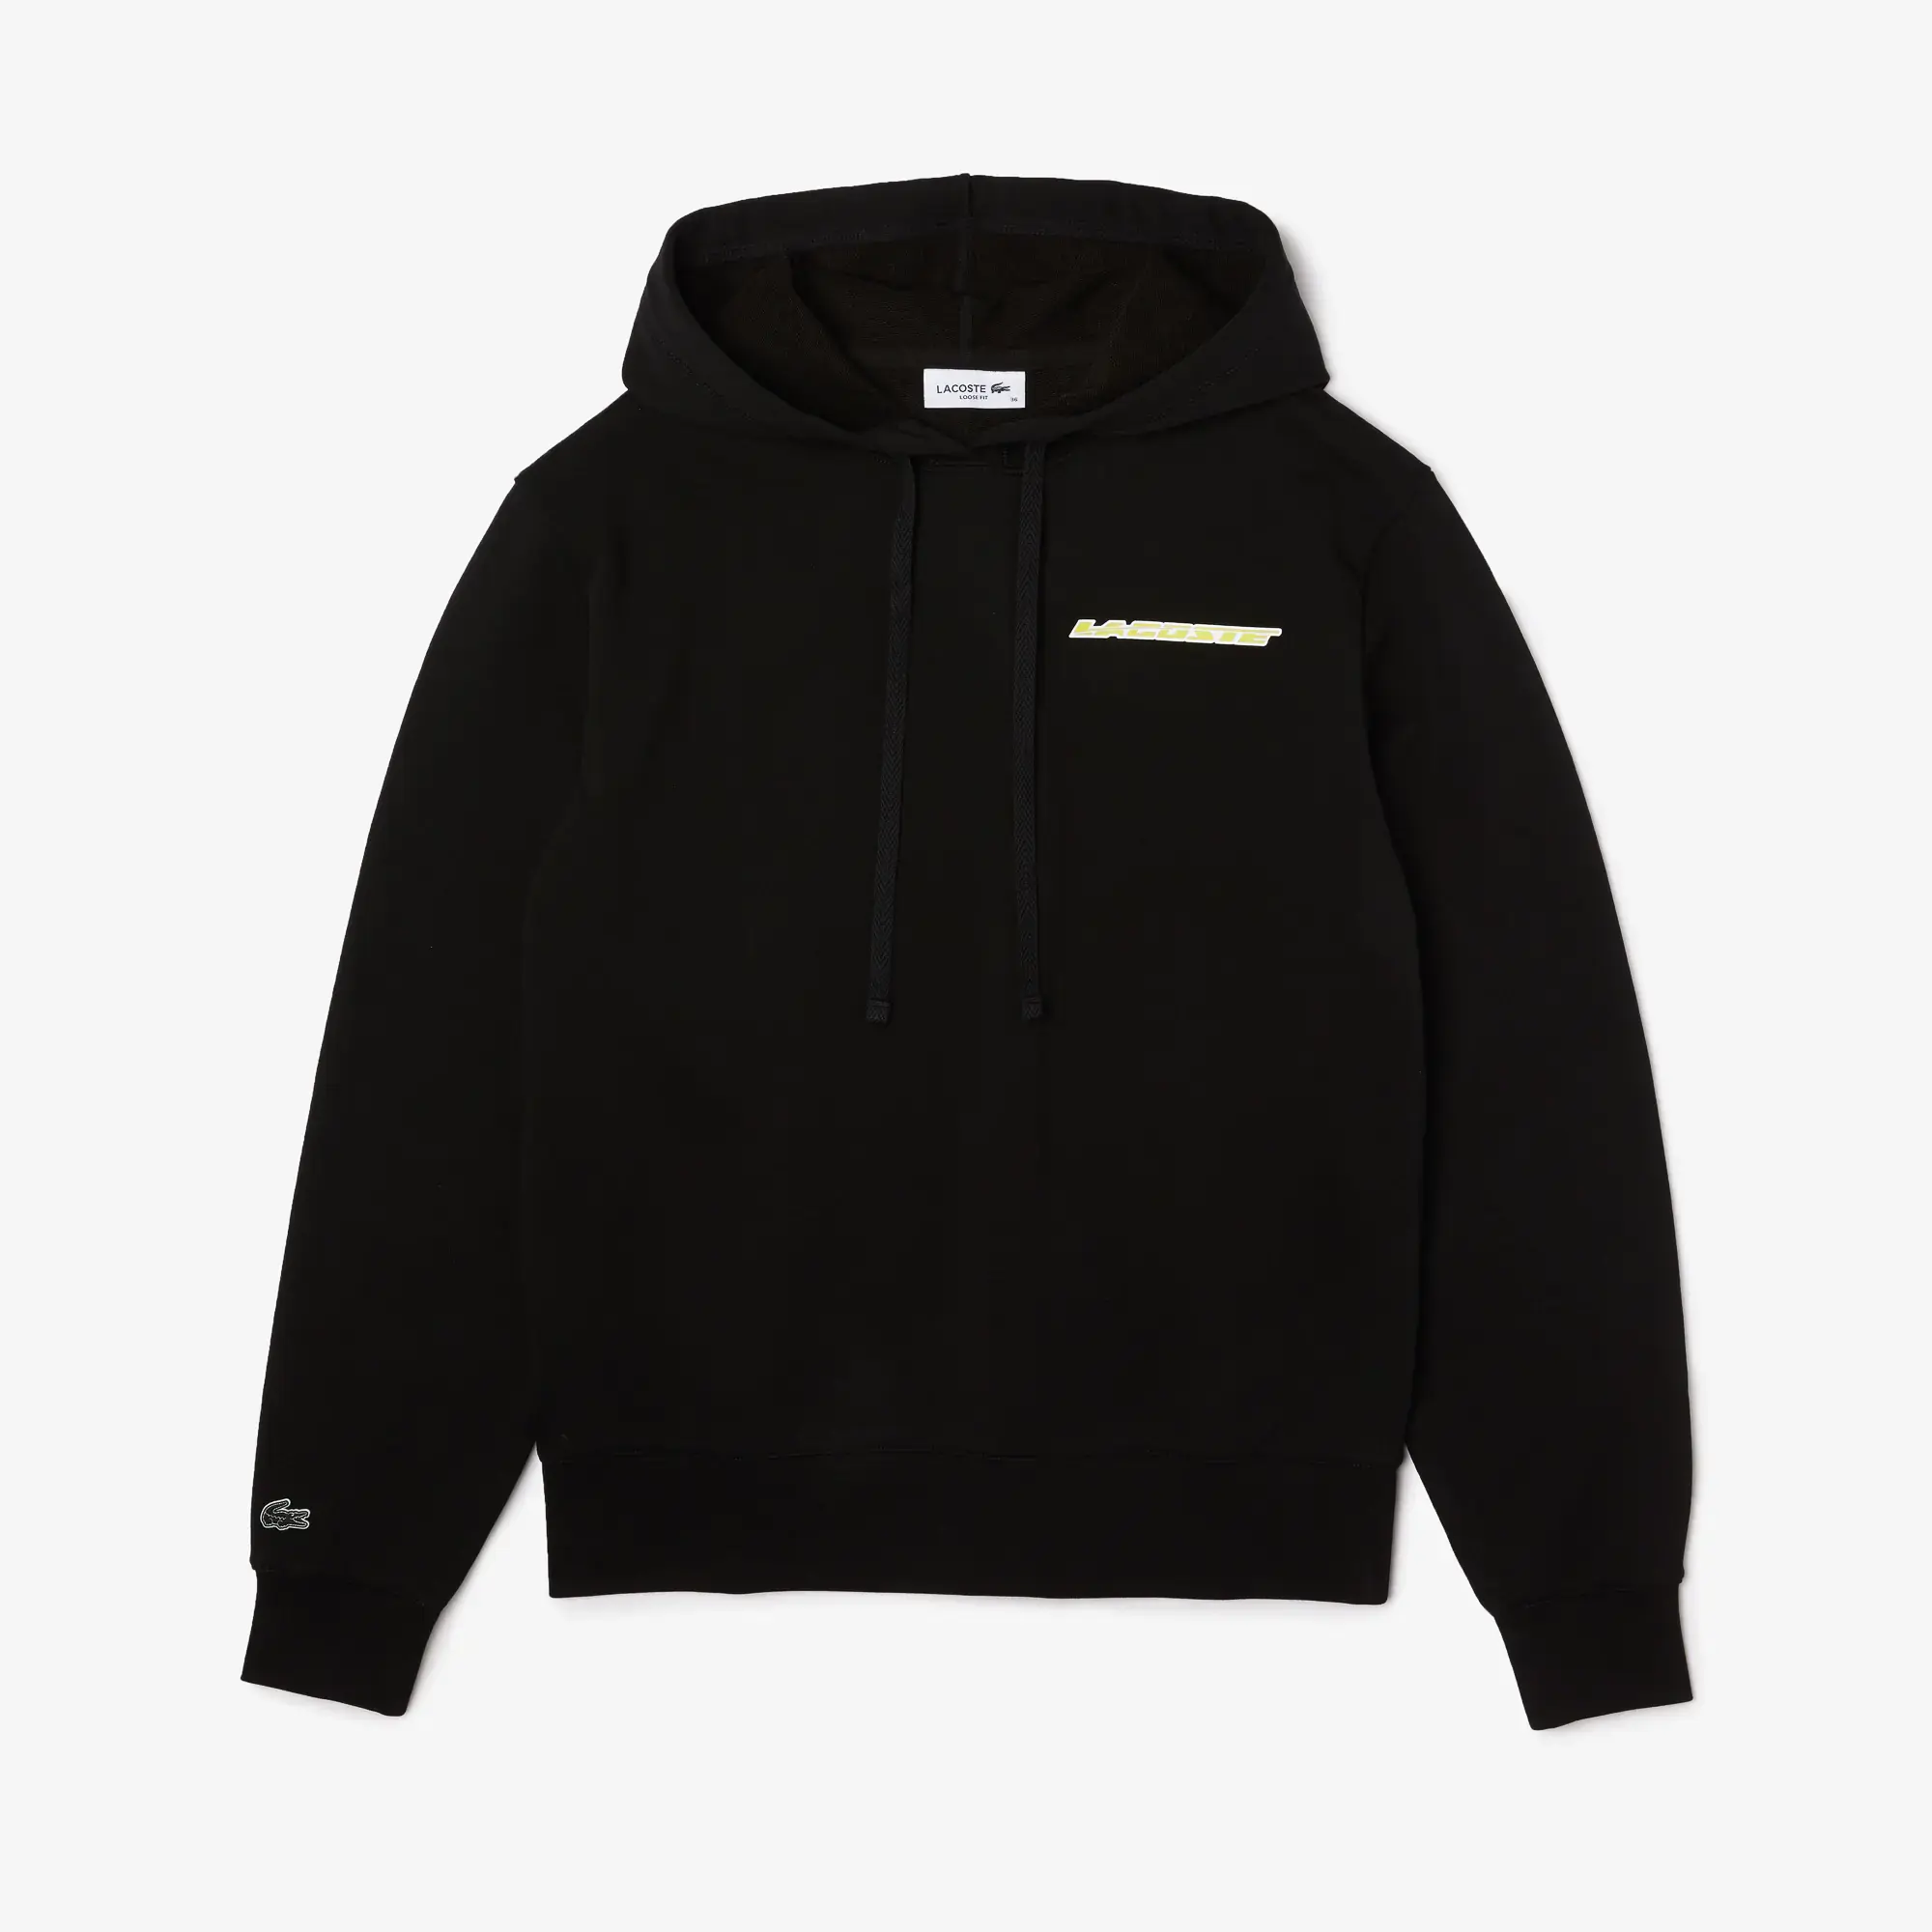 Lacoste Women’s Loose Fit Hoodie with Contrast Branding. 1